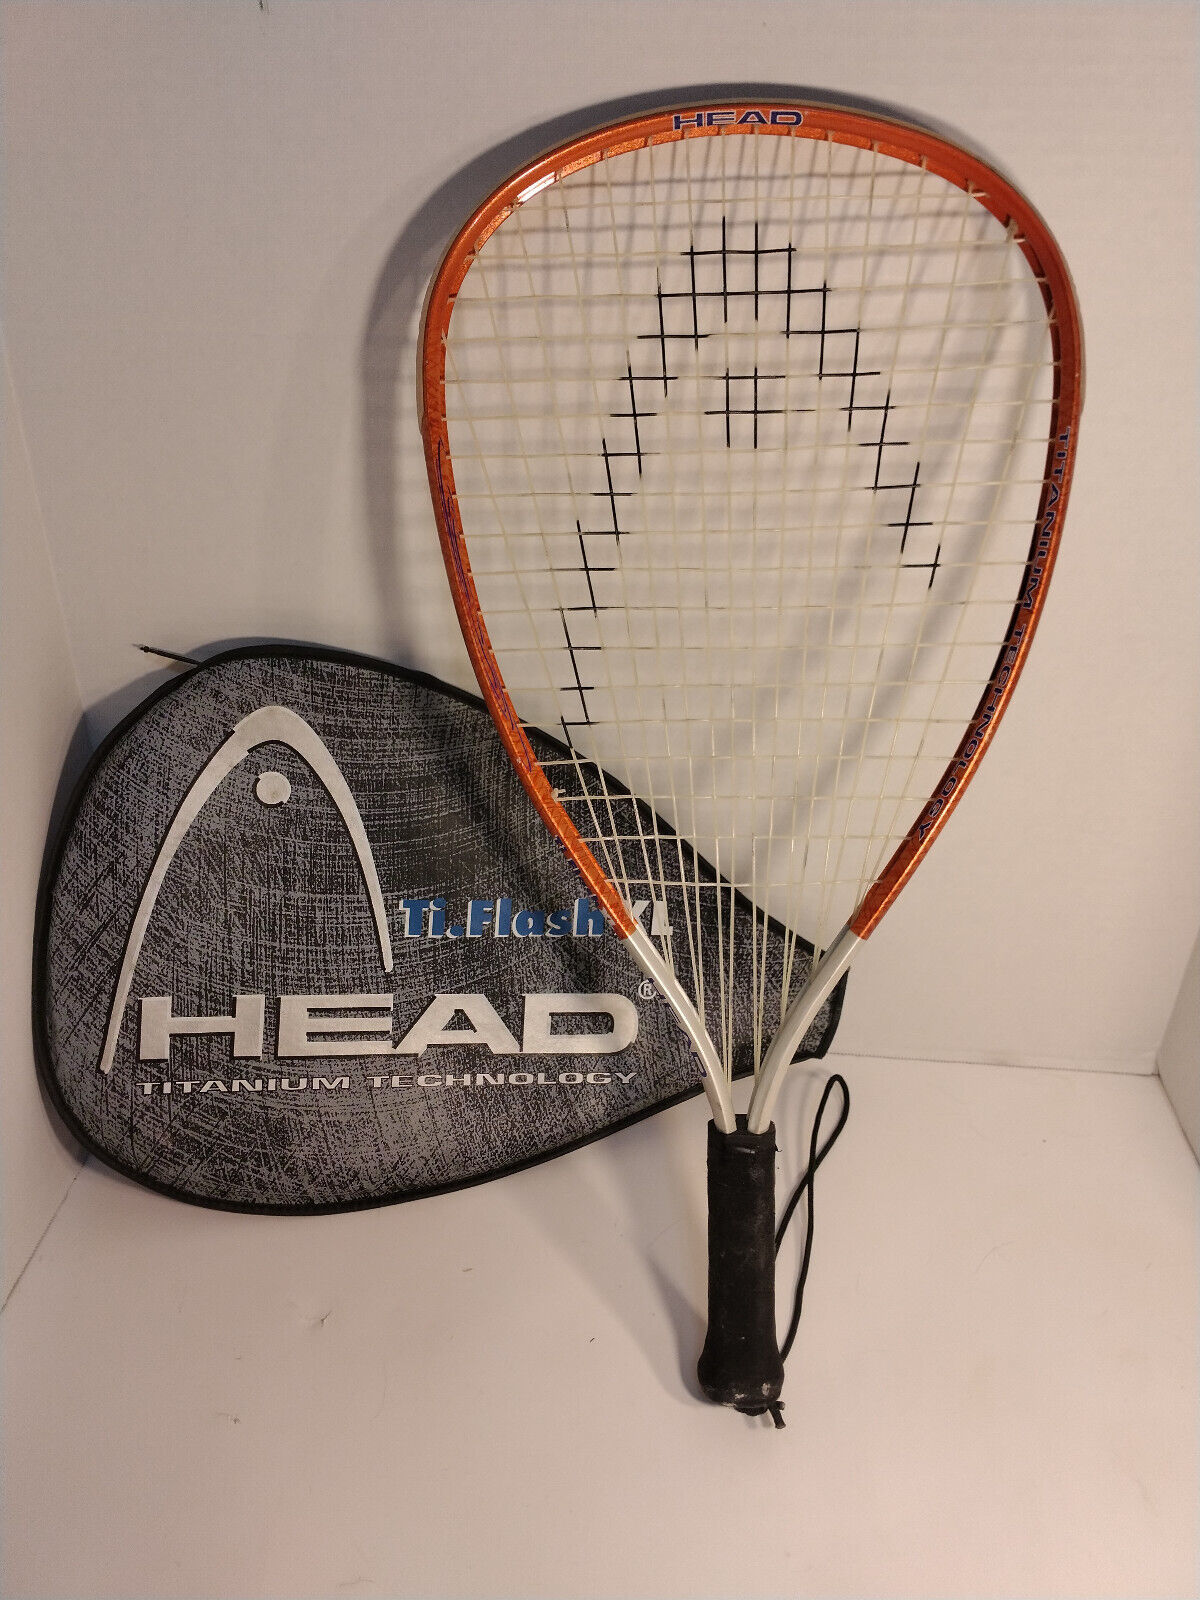 Primary image for Head Ti.Flash XL Titanium Racquetball Racket 3 5/8” Grip With Case